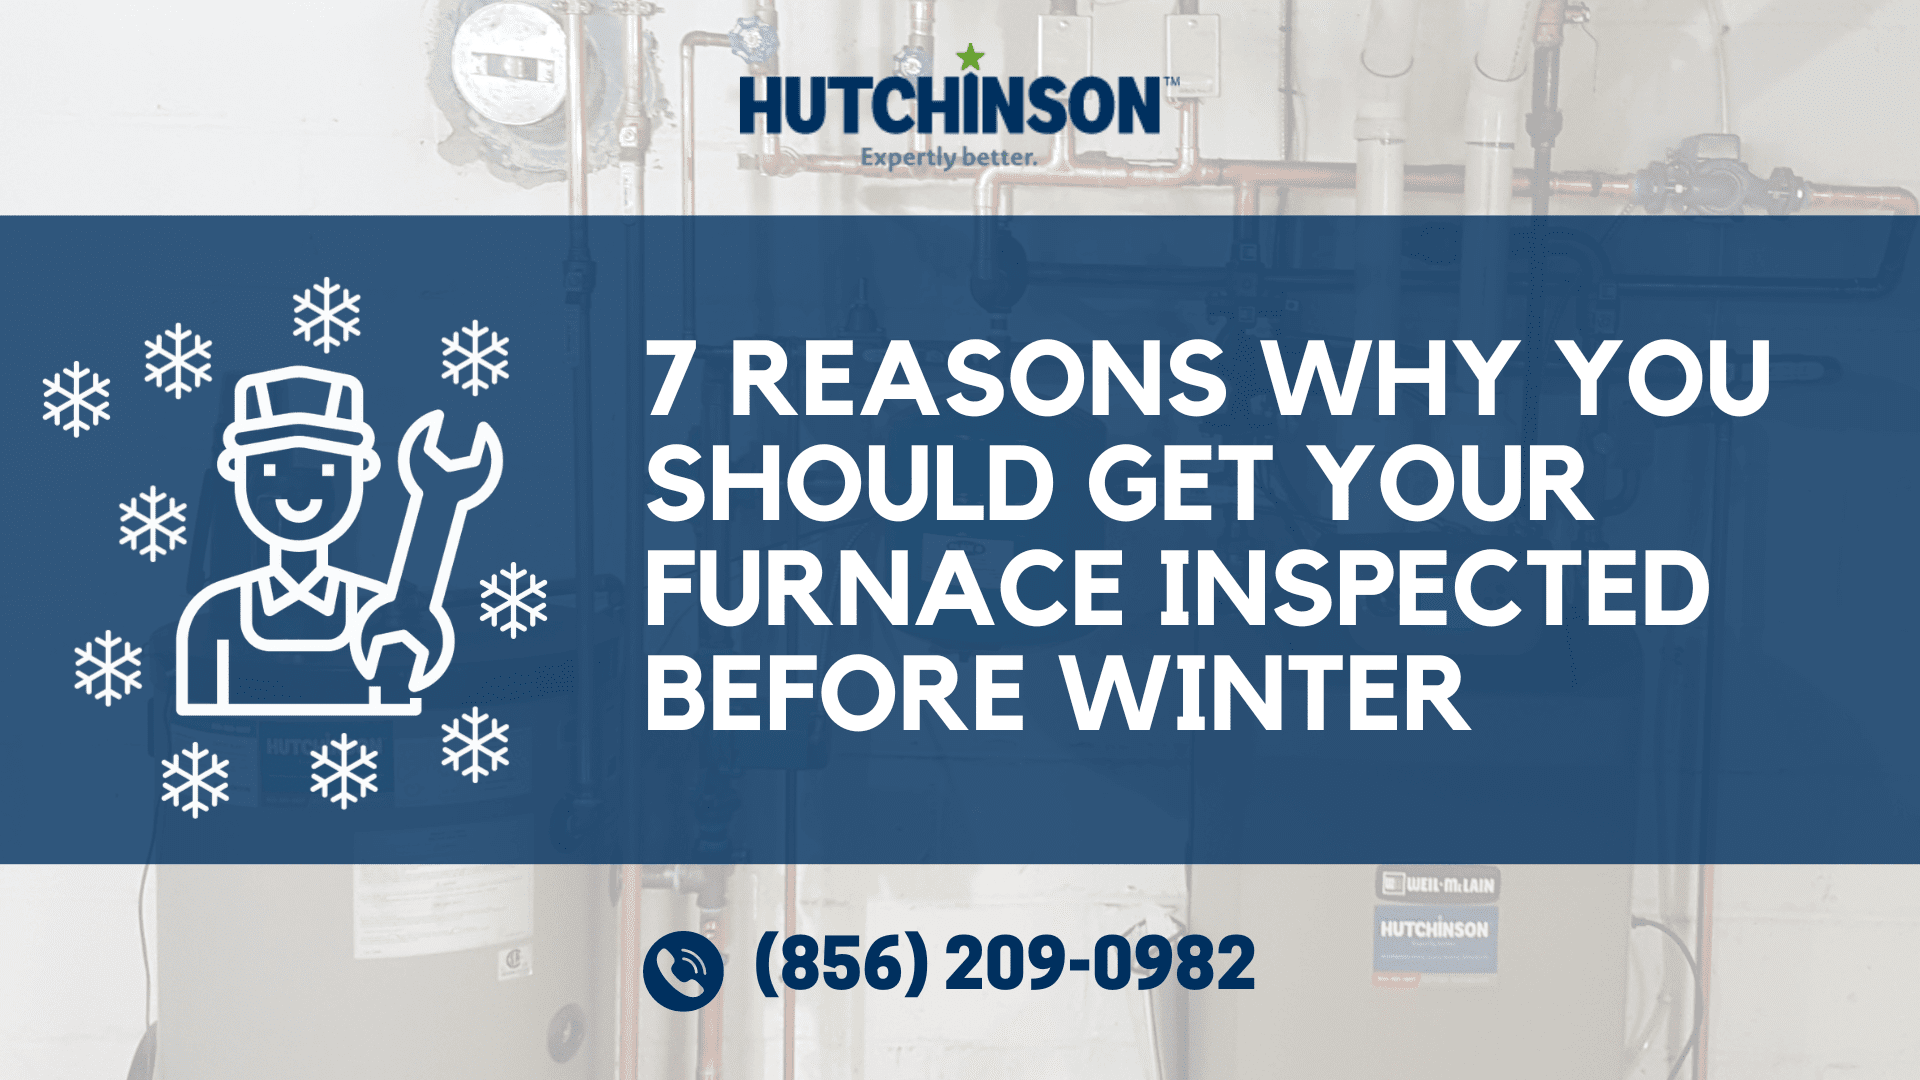 7 Reasons Why You Should Get Your Furnace Inspected Before Winter